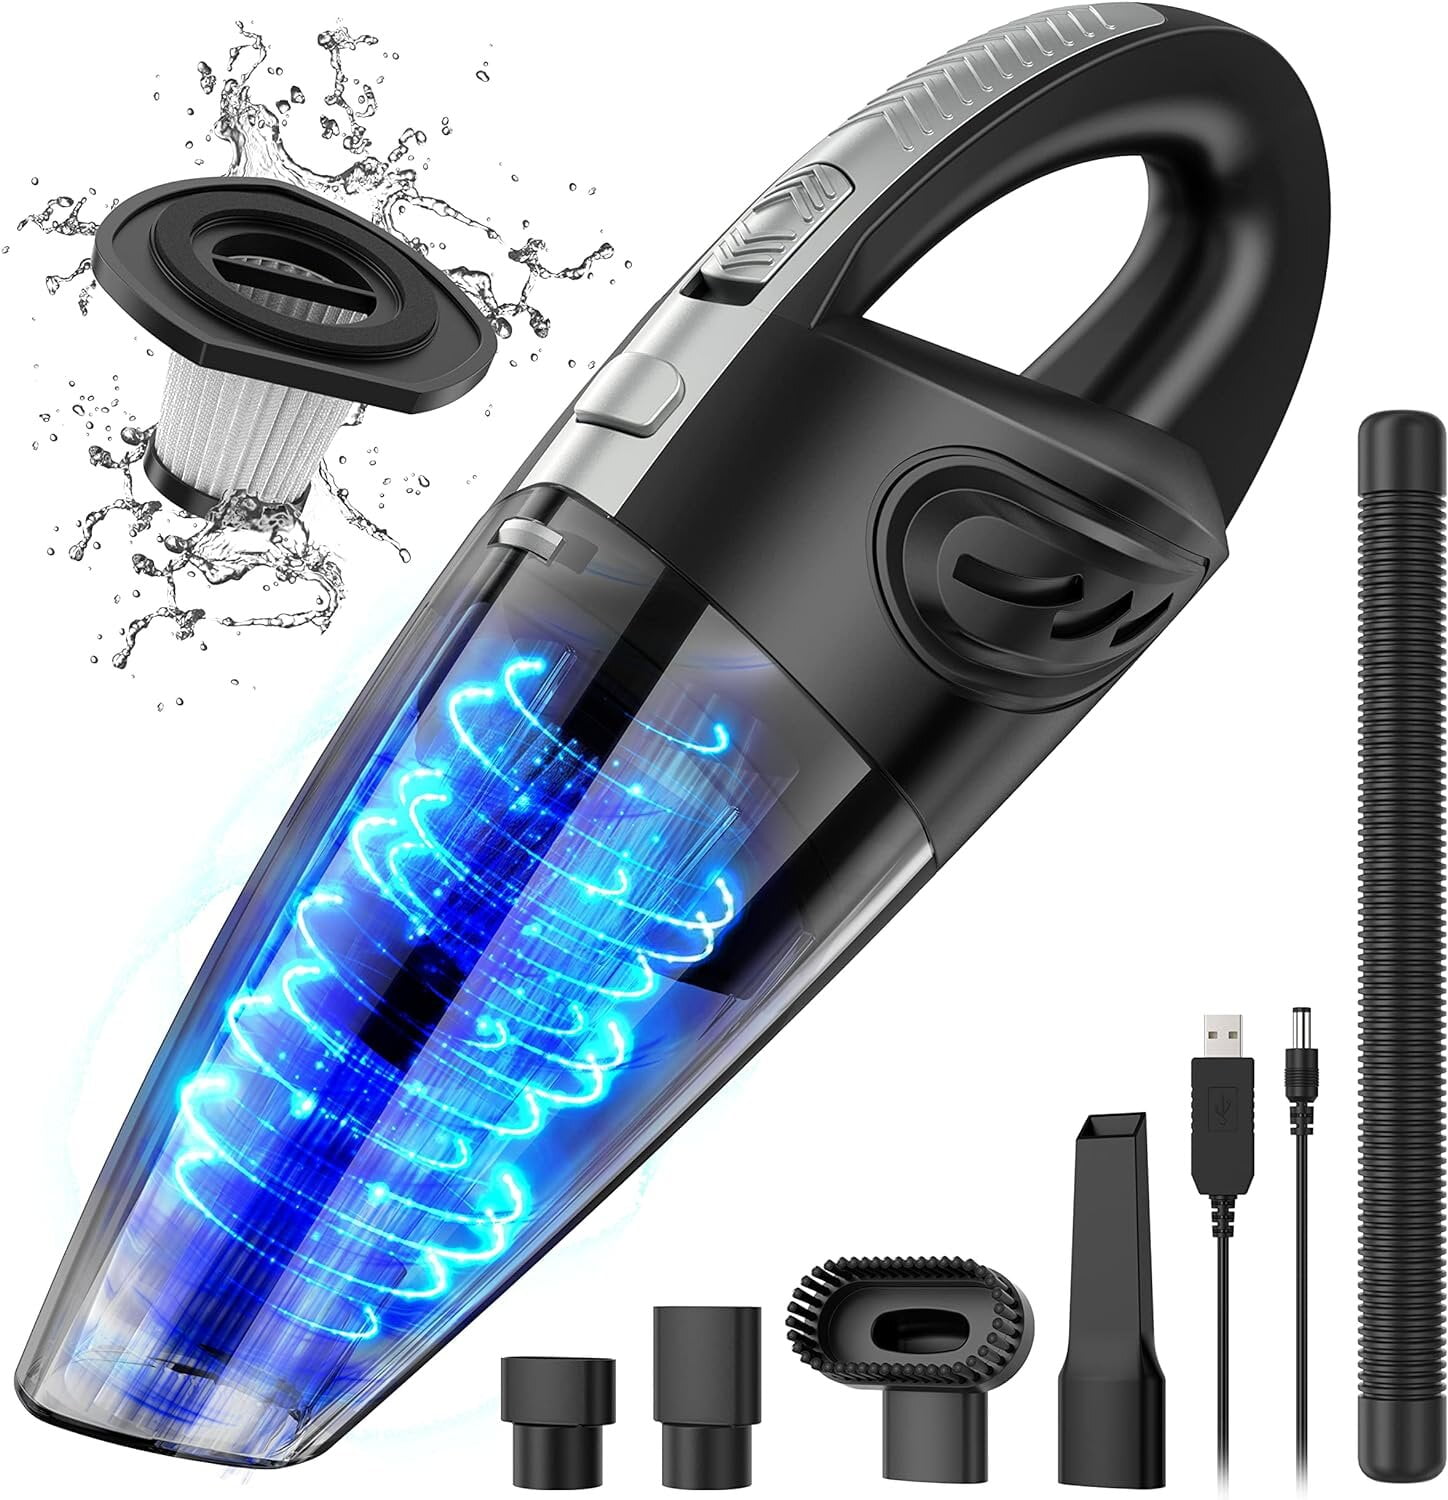 Gpeh Portable Car Vacuum Cleaner Cordless Handheld Vacuum Best Car & Auto Accessories Kit for Detailing and Cleaning Car Interior Home Car Dual